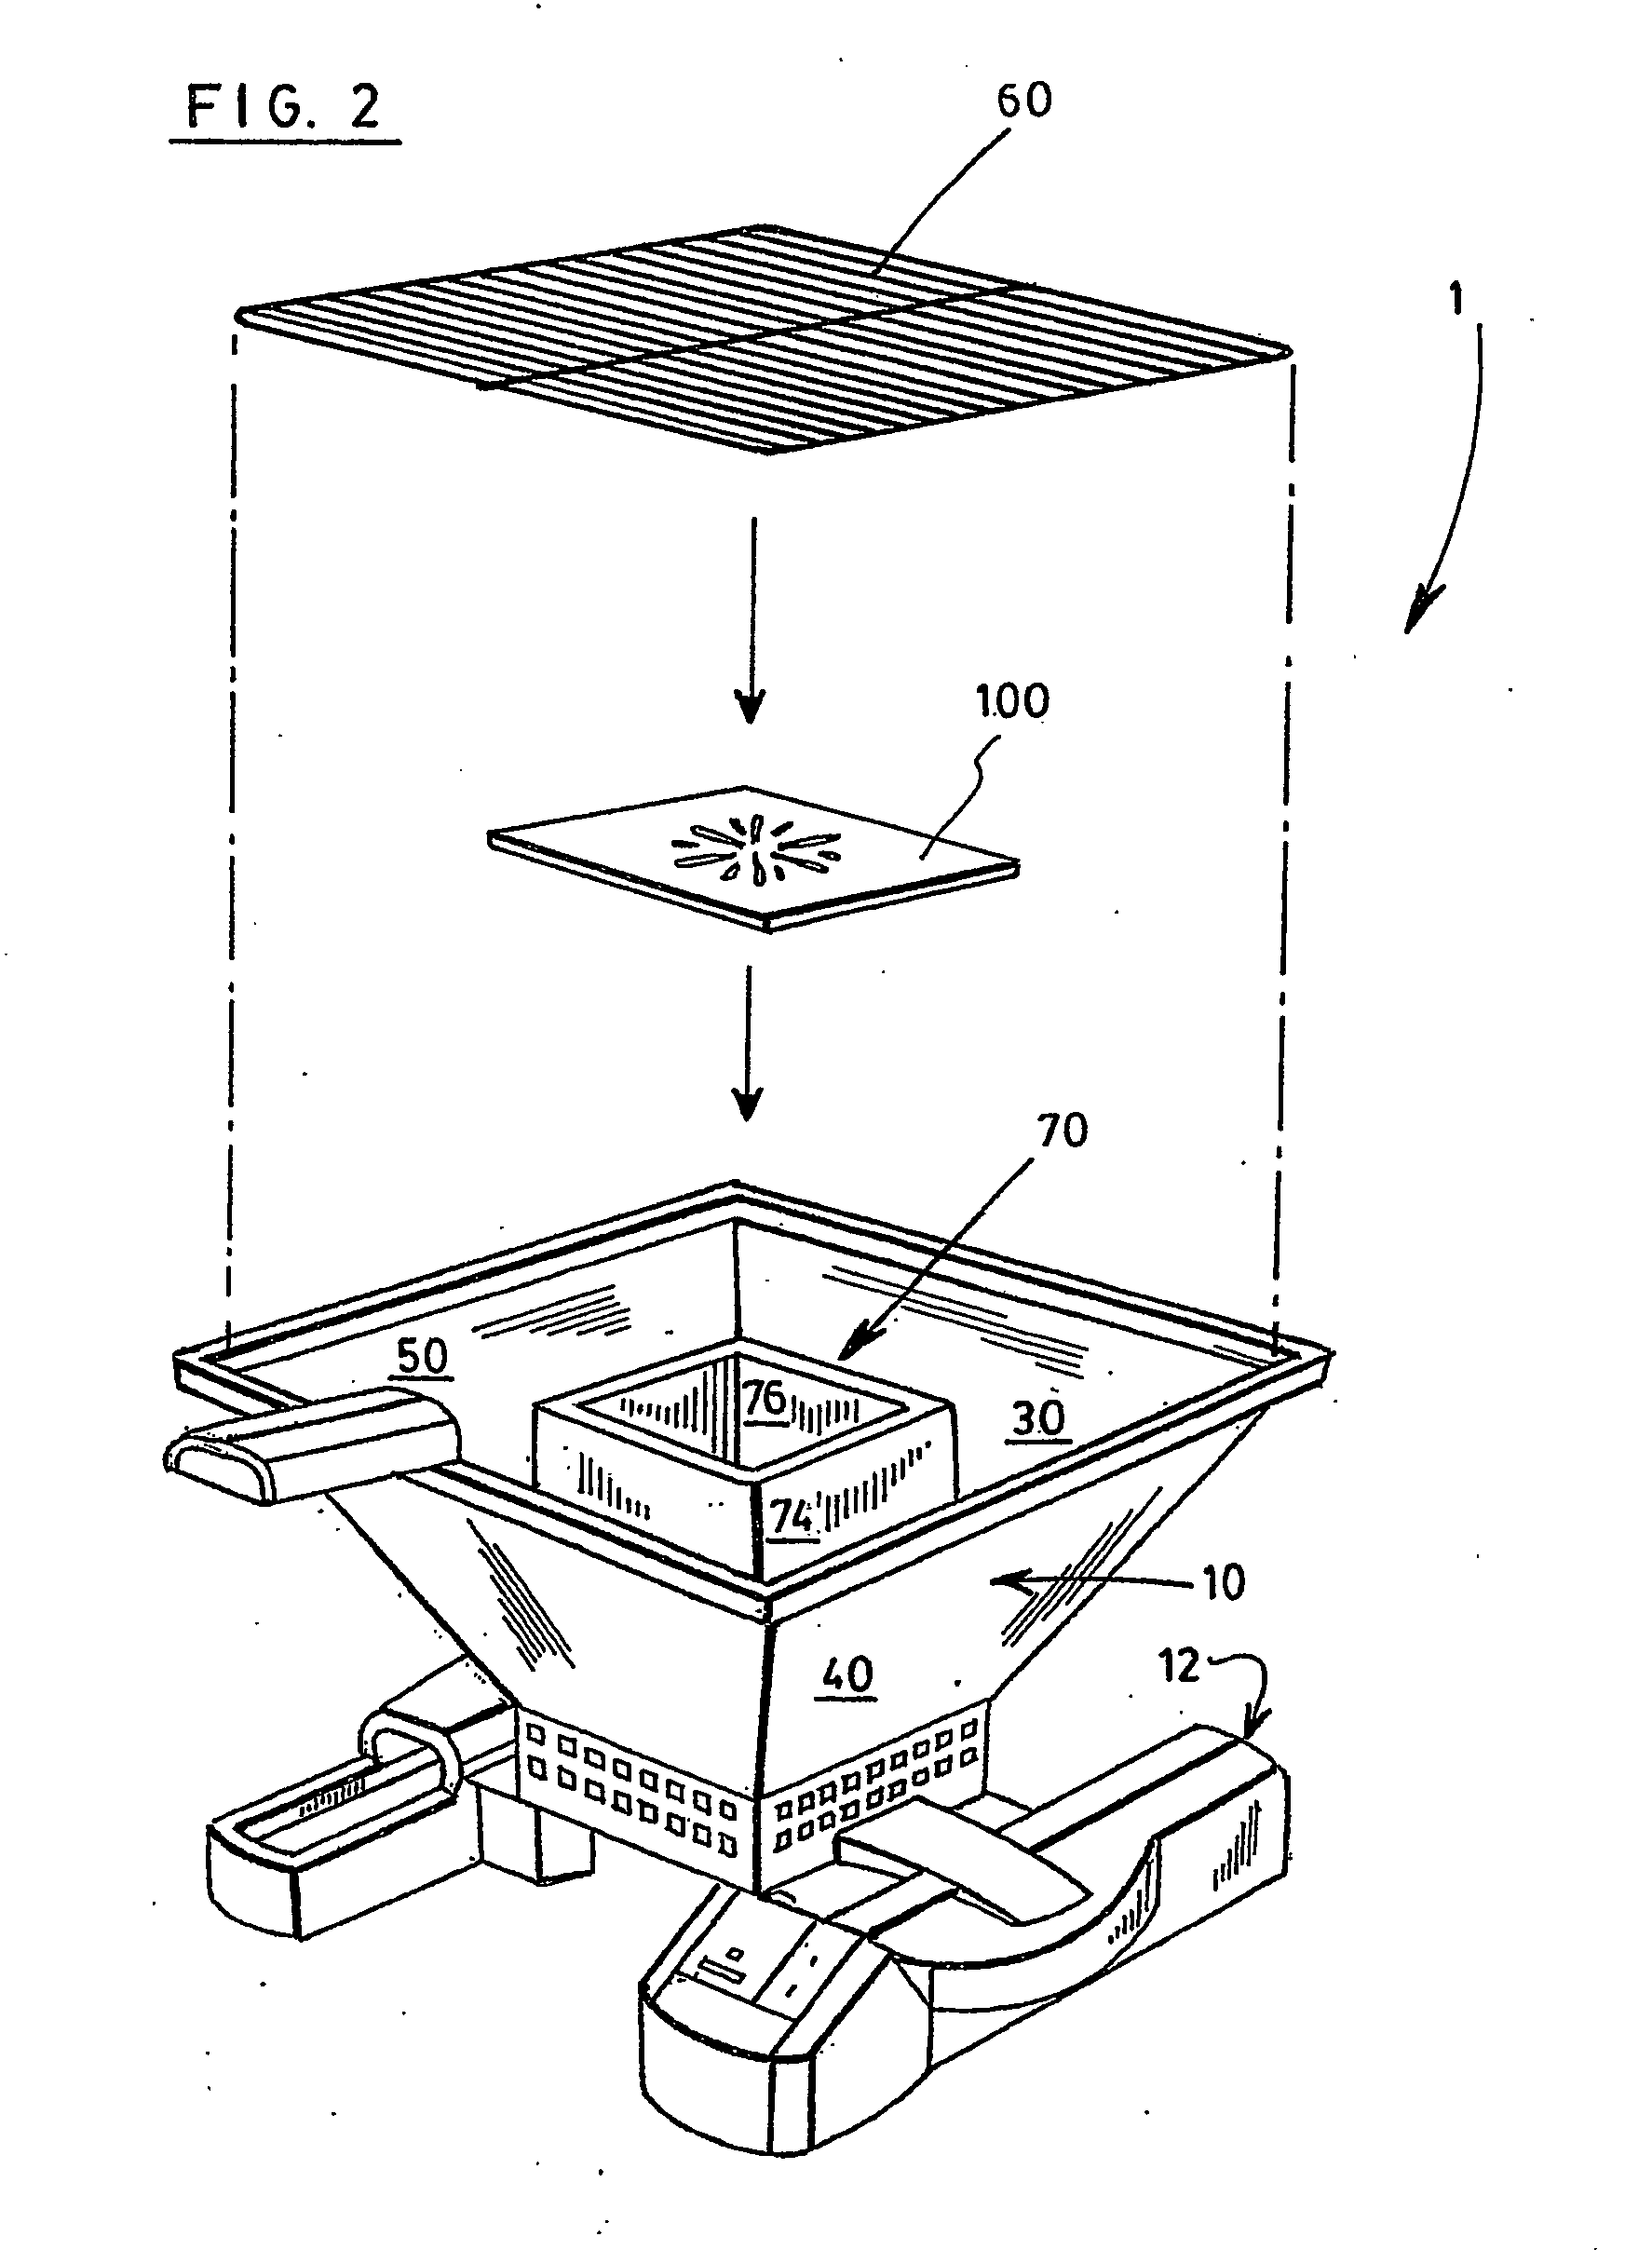 Wood fed barbecue apparatus